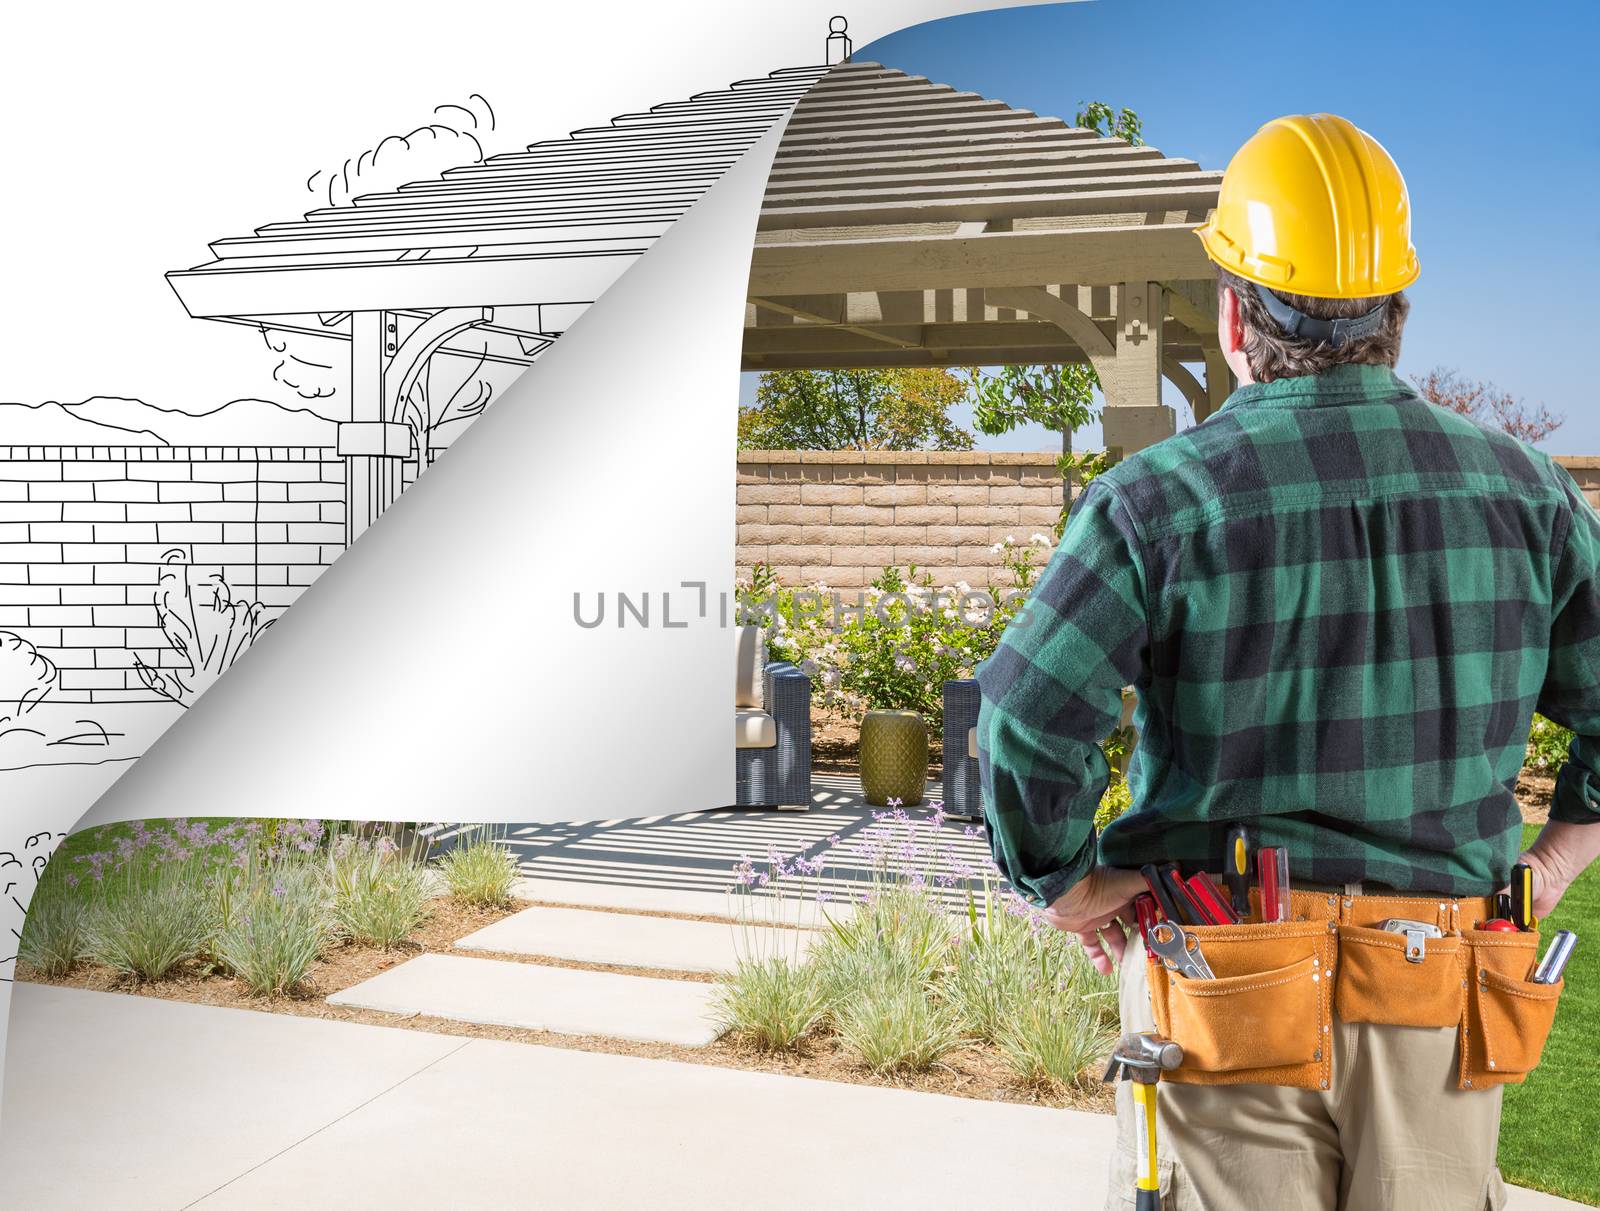 Contractor Facing Pergola Photo with Page Flipping to Drawing Behind by Feverpitched